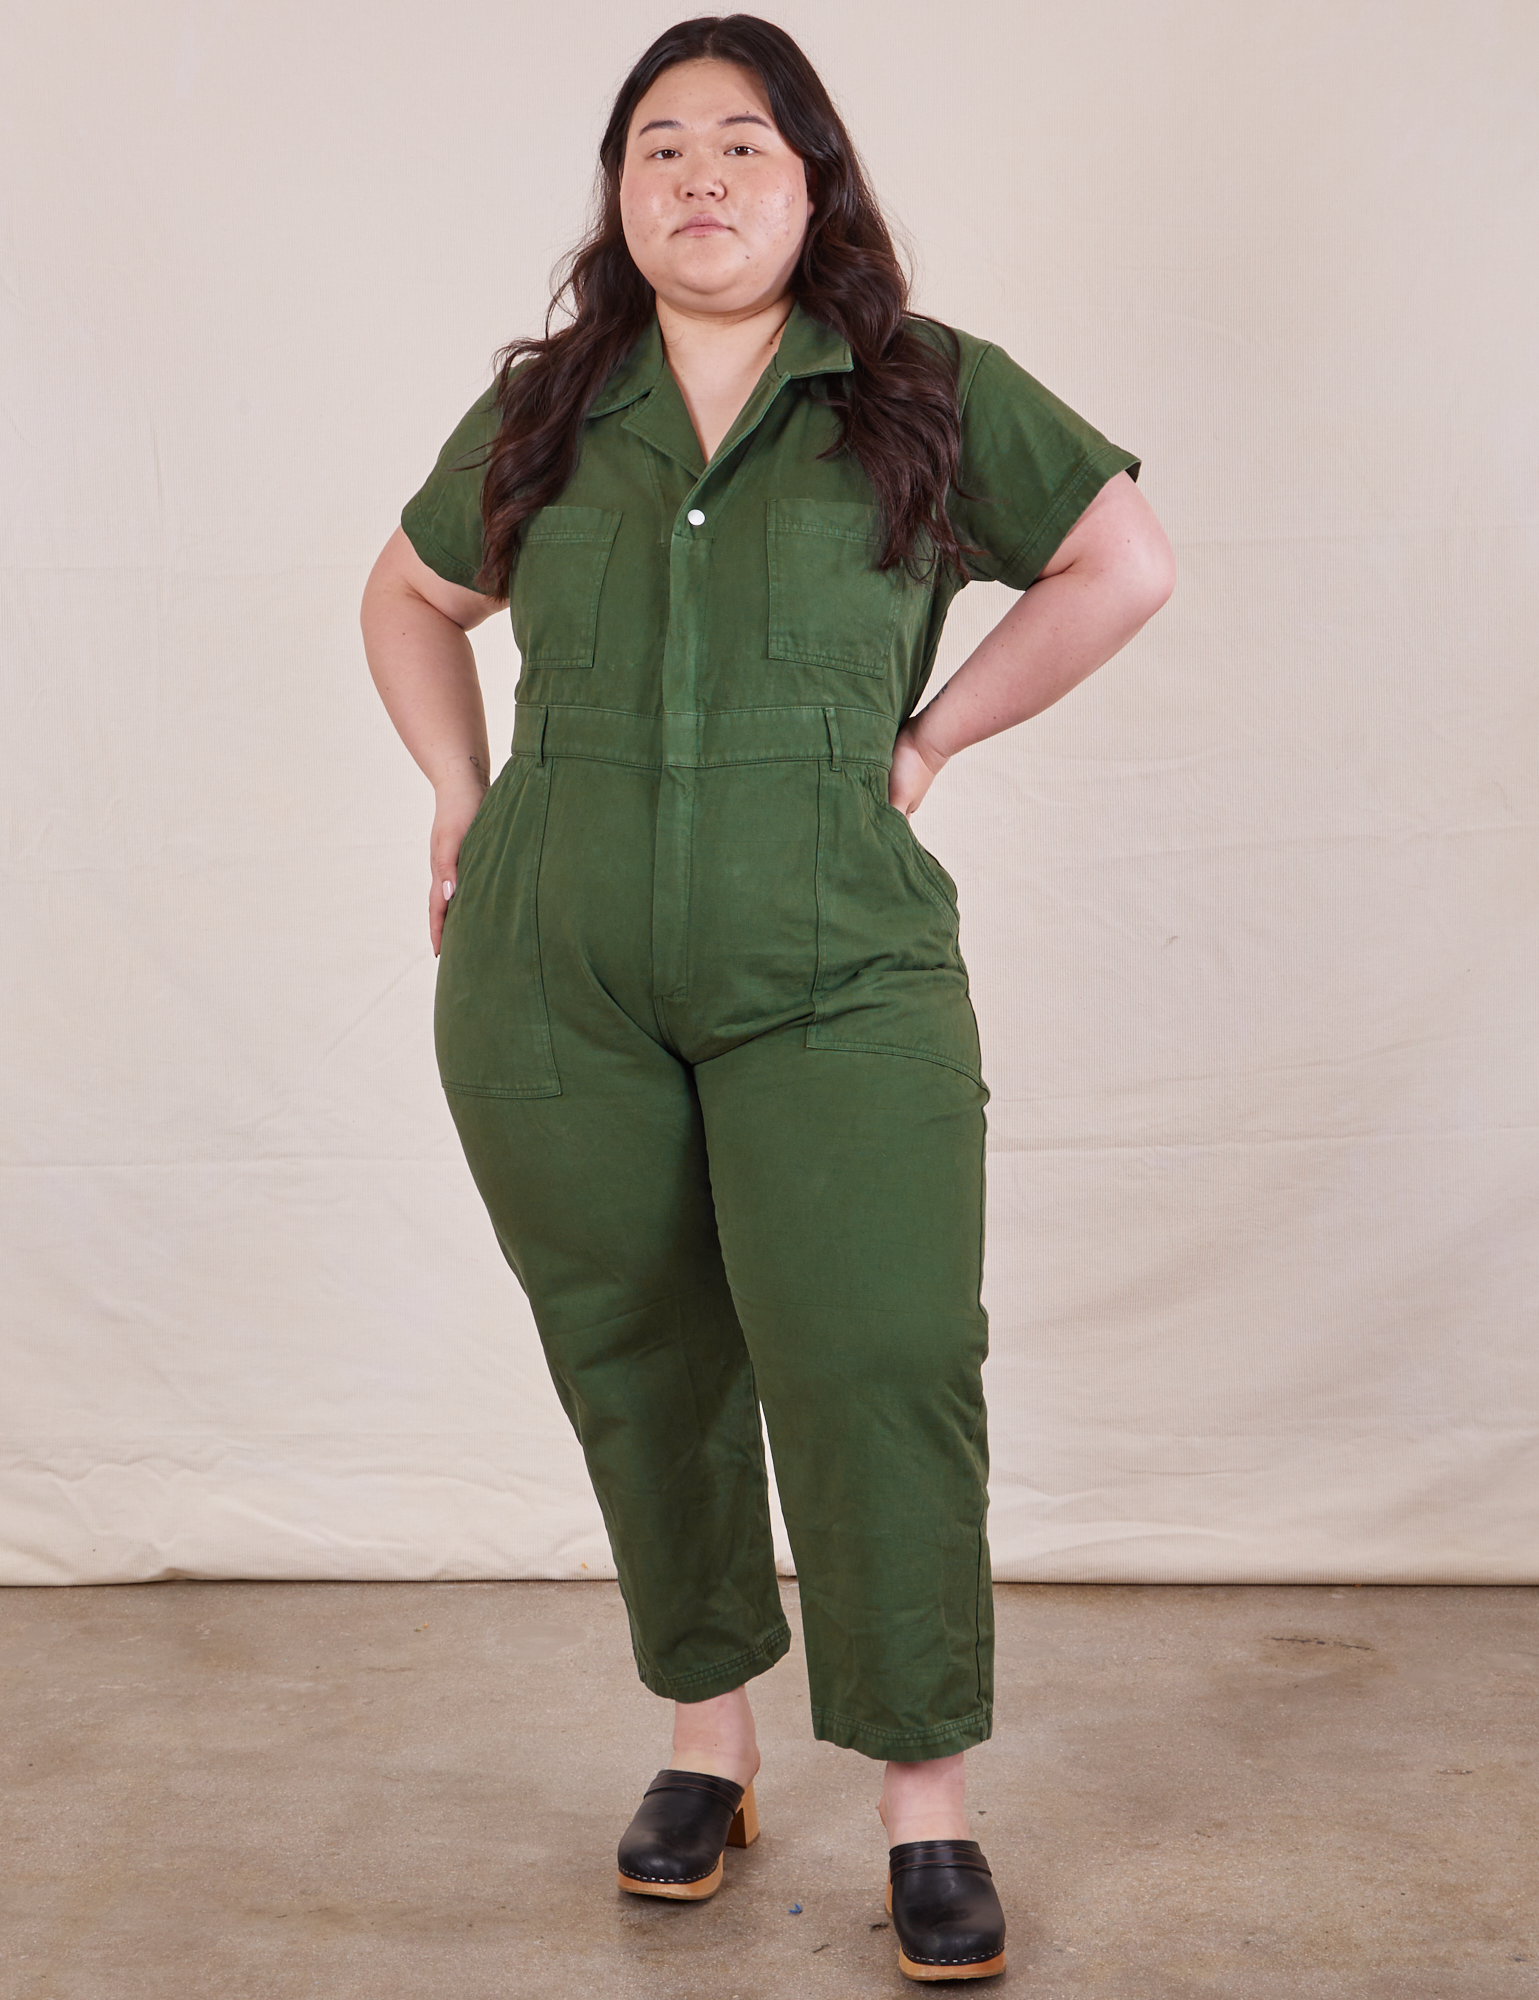 Ashley is 5’7” and wearing 1XL Petite Short Sleeve Jumpsuit in Dark Emerald Green